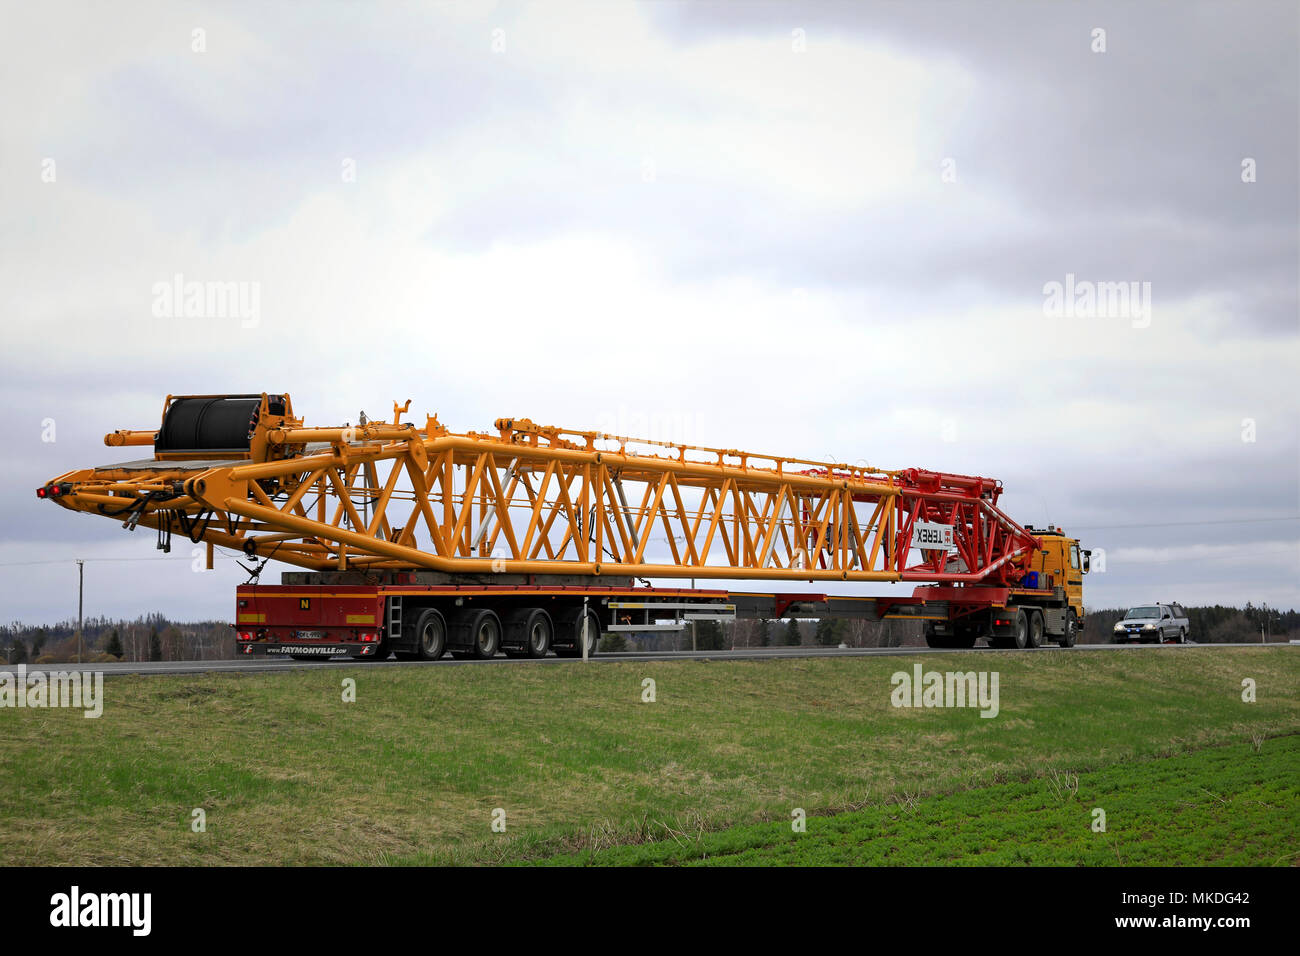 45 metres long oversize transport of Terex lifting equipment on the road. The load requires a pilot car in front of and behind of the long vehicle. Hu Stock Photo